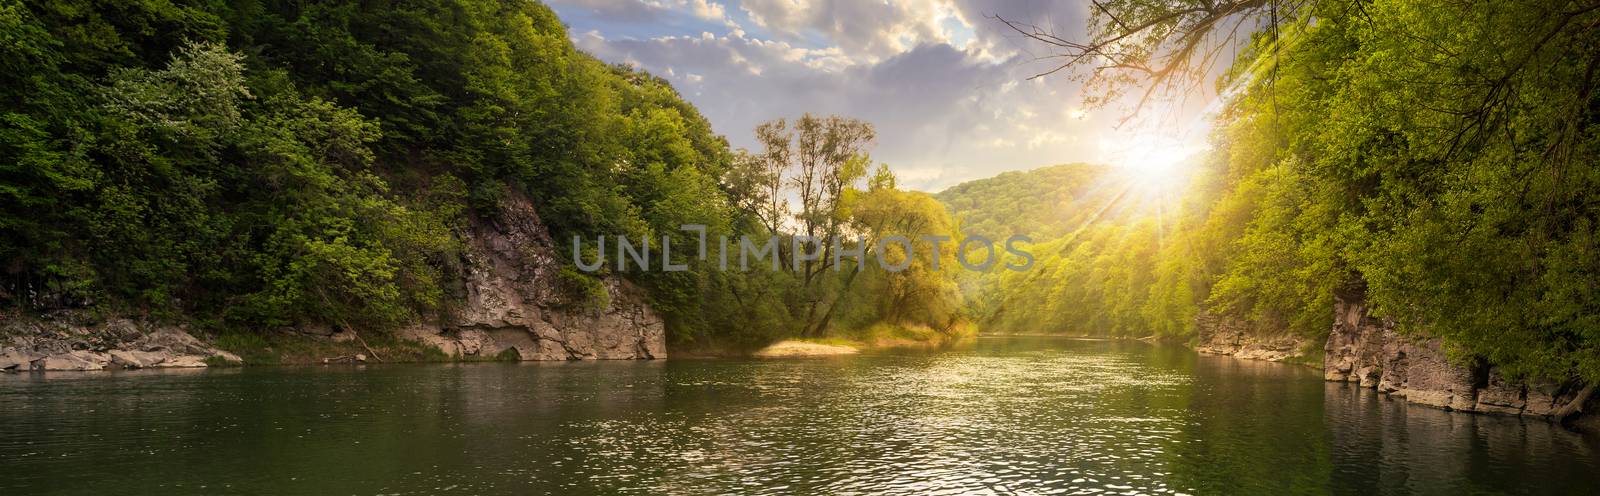 mountain river with stones on the shore in the forest near the mountain slope in sunset light